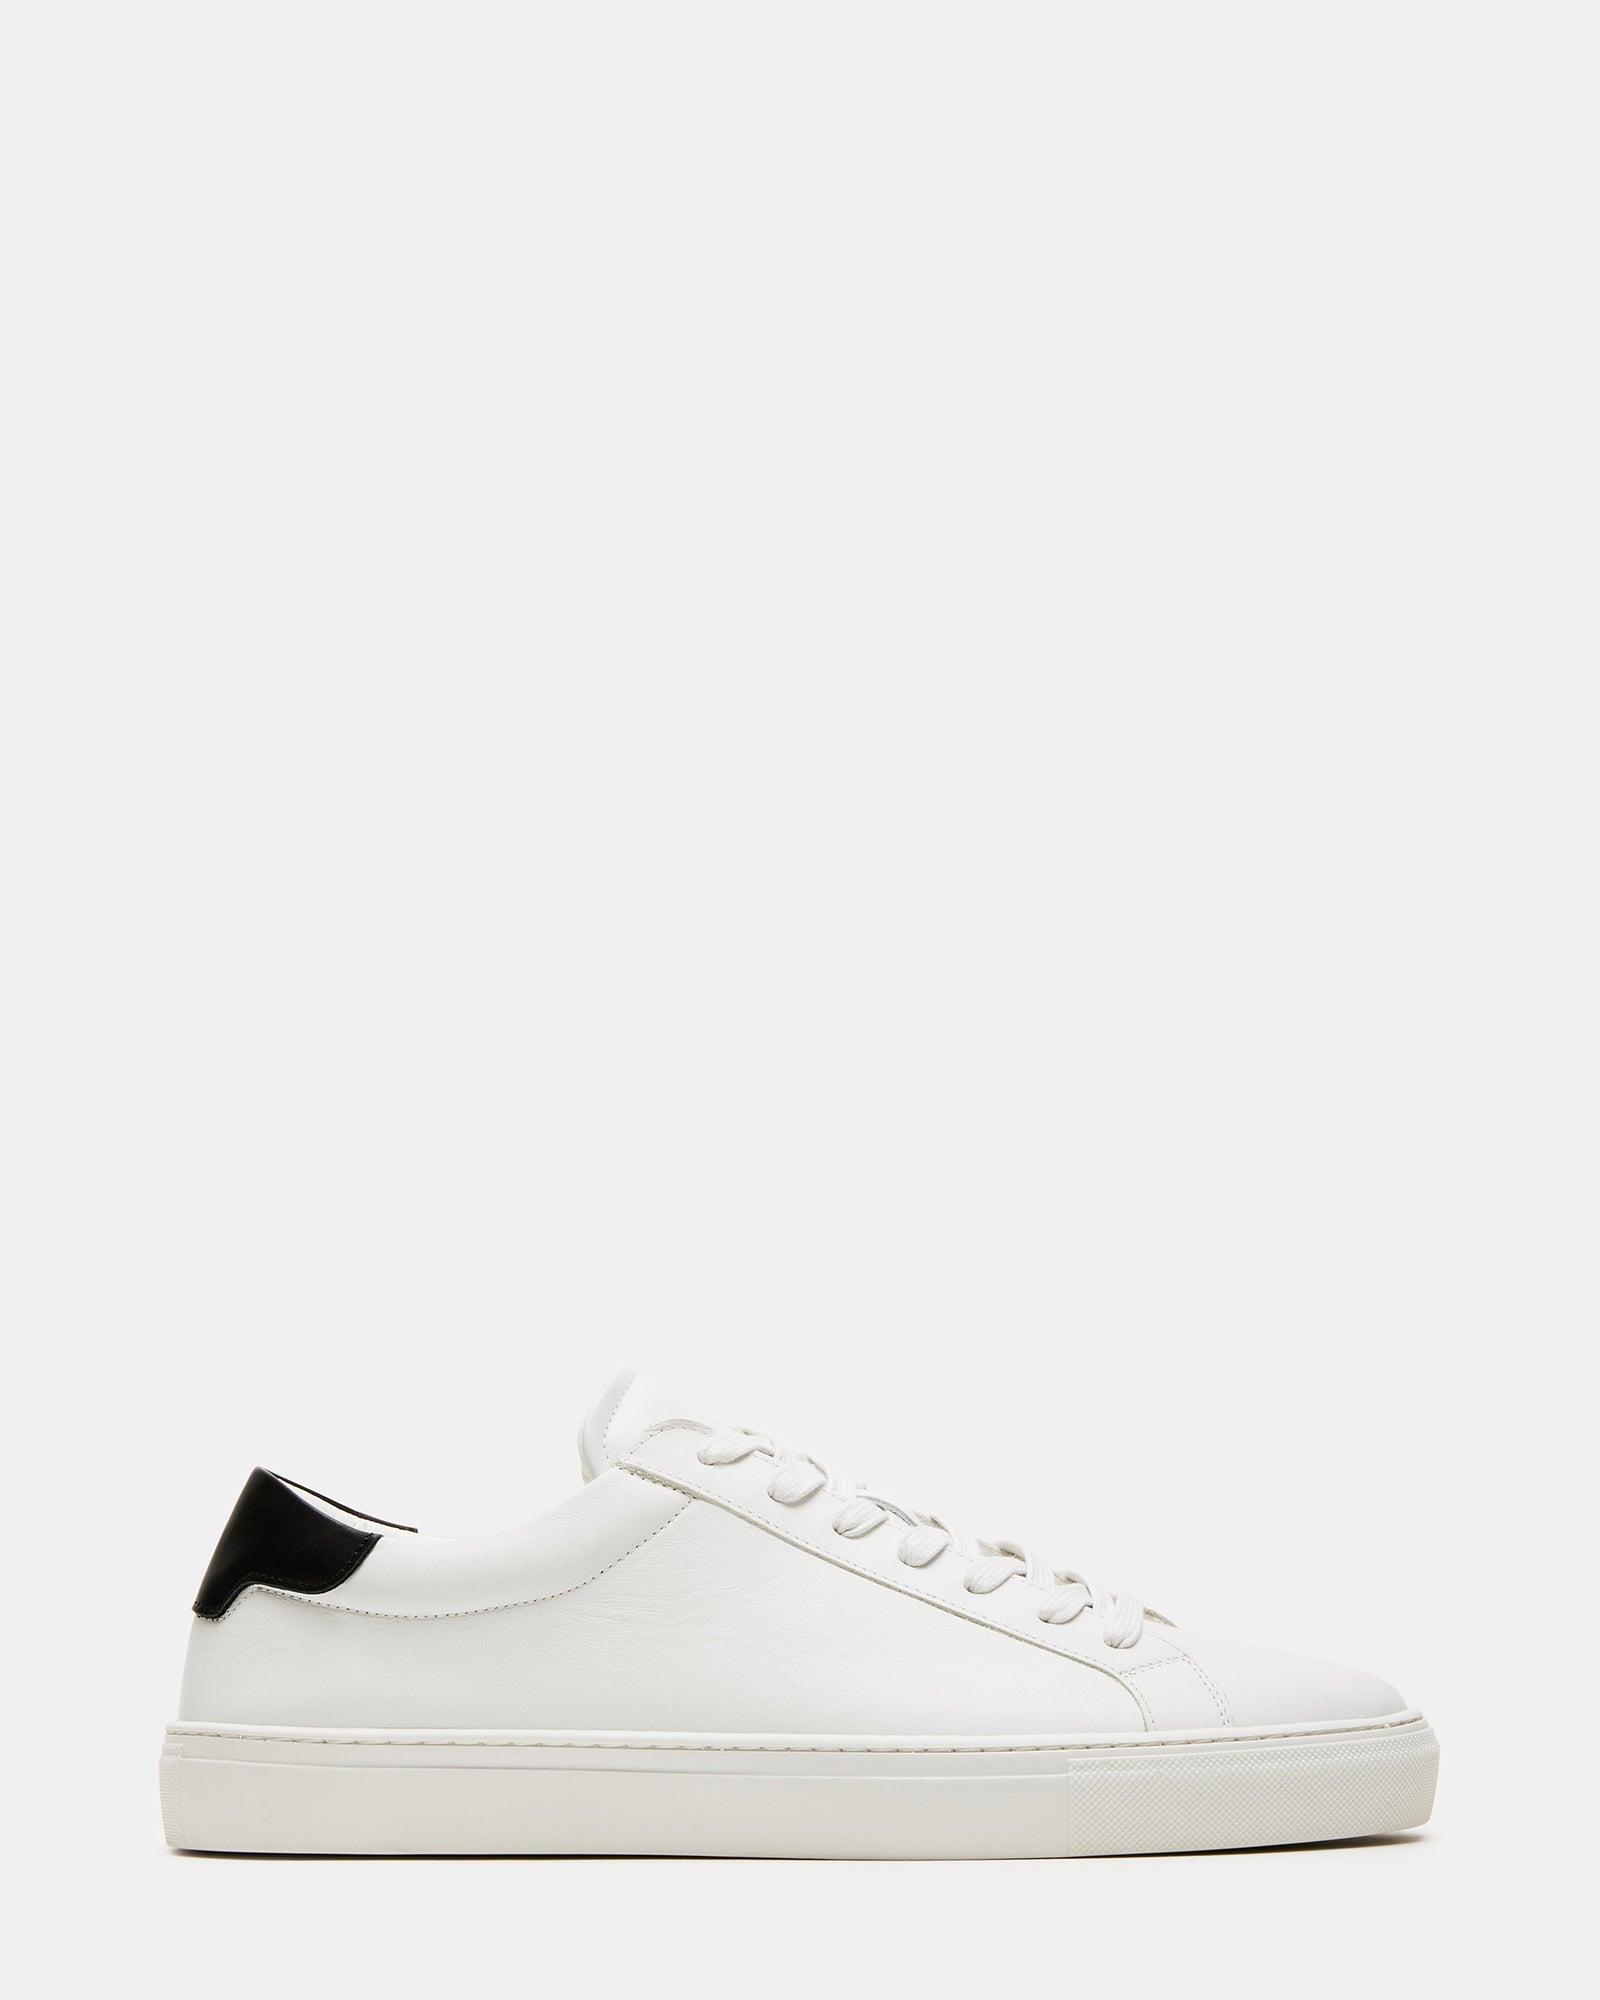 Stylish ALEXANDER MCQUEEN Leather Trainers